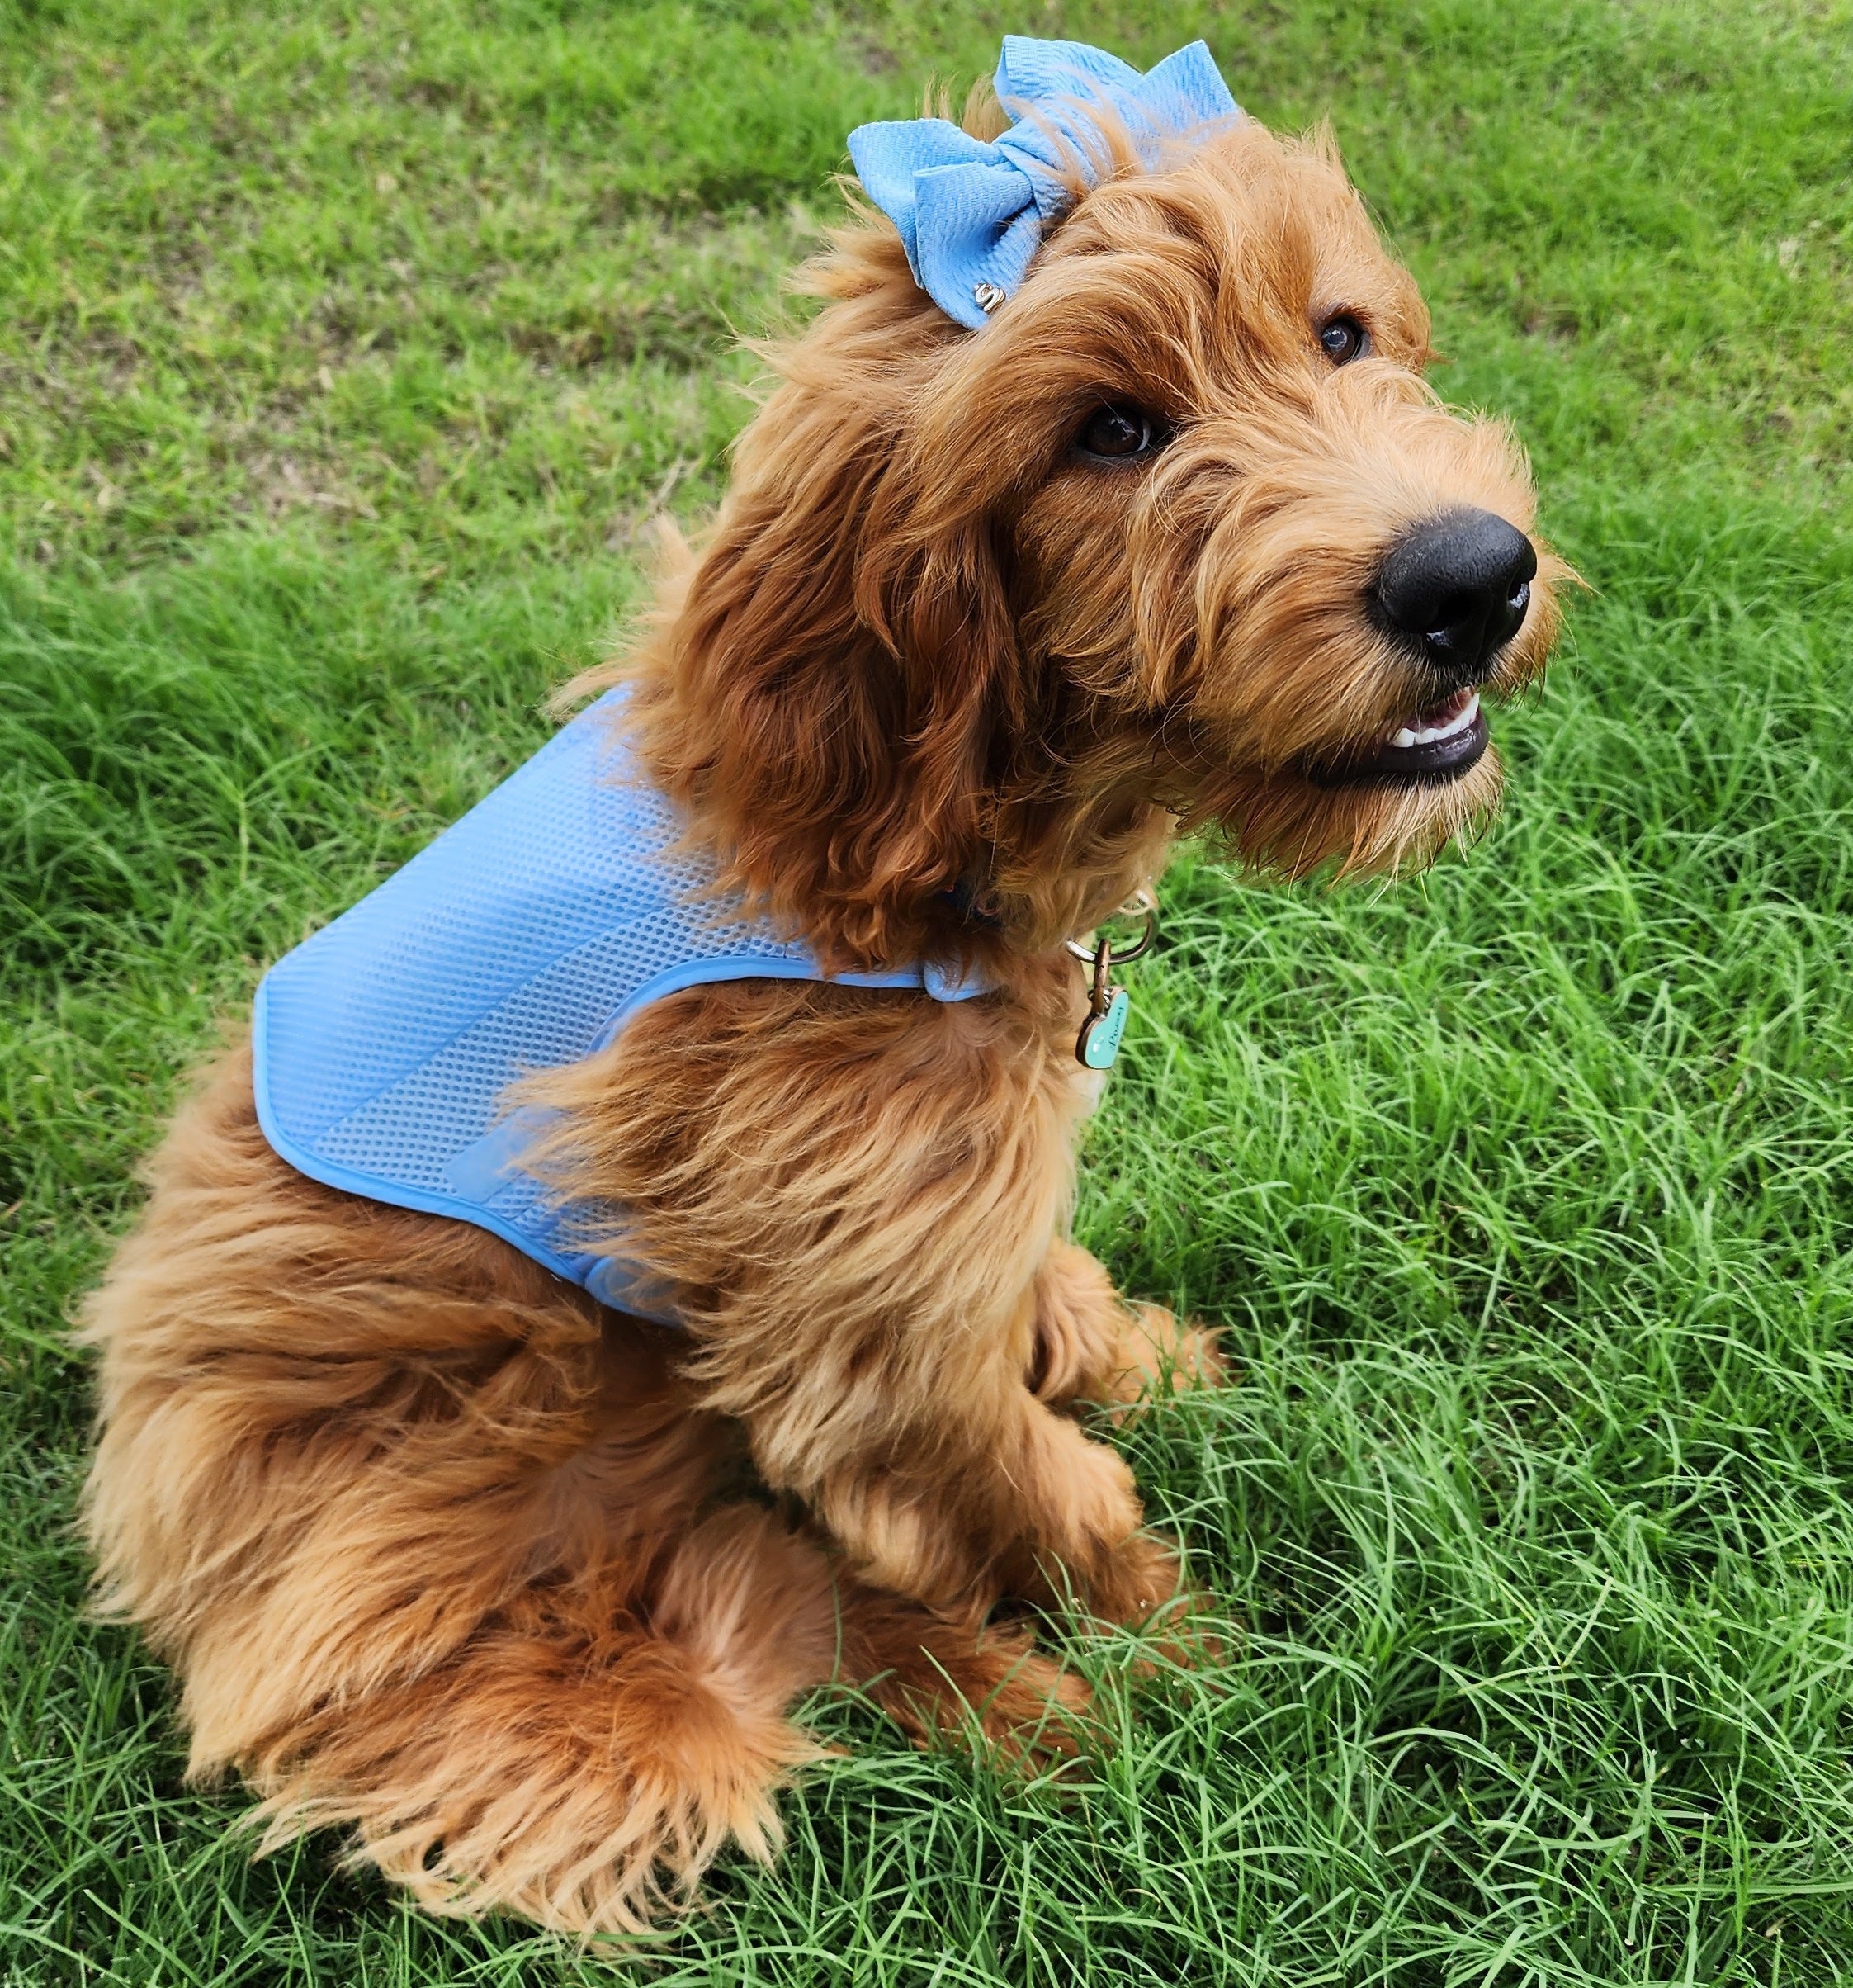 Cooling Comfort Vest for Dogs - Soft, reusable, non-toxic. Heat cramps / heat exhaustion / heatstroke prevention for dogs.